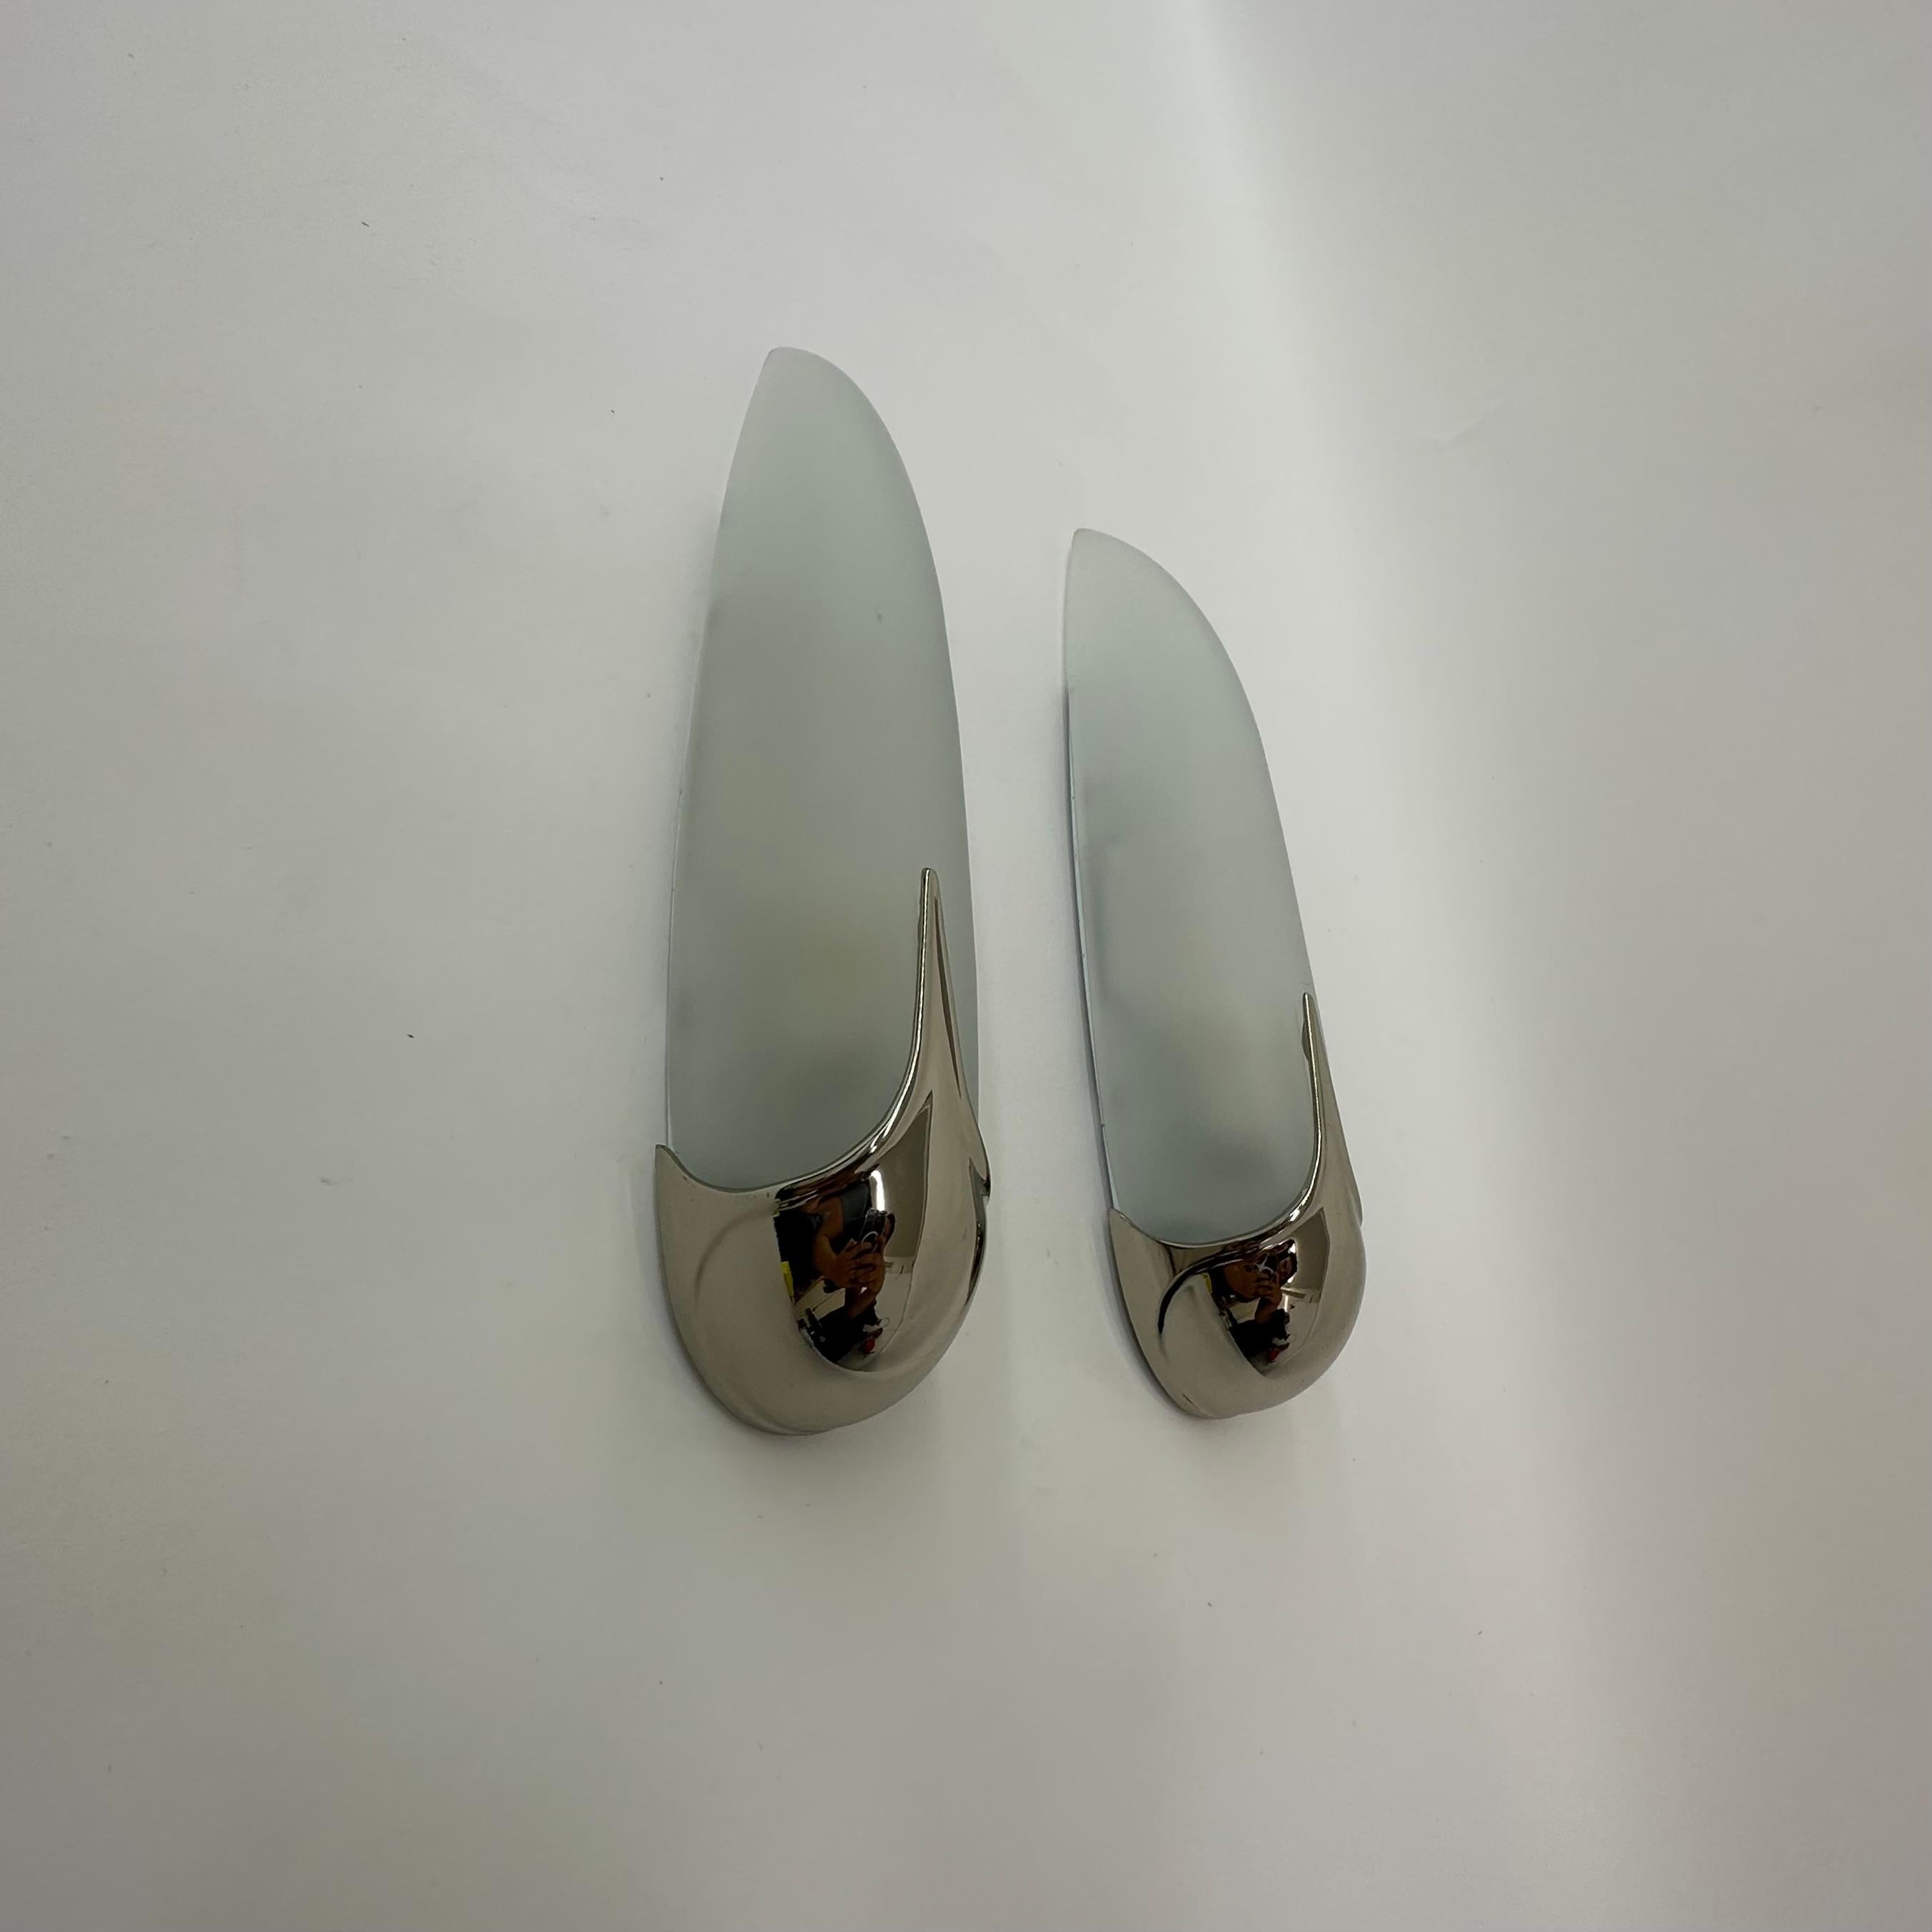 Pair of Idearte Sconces Wall Lamps, Spain, 1980s For Sale 9